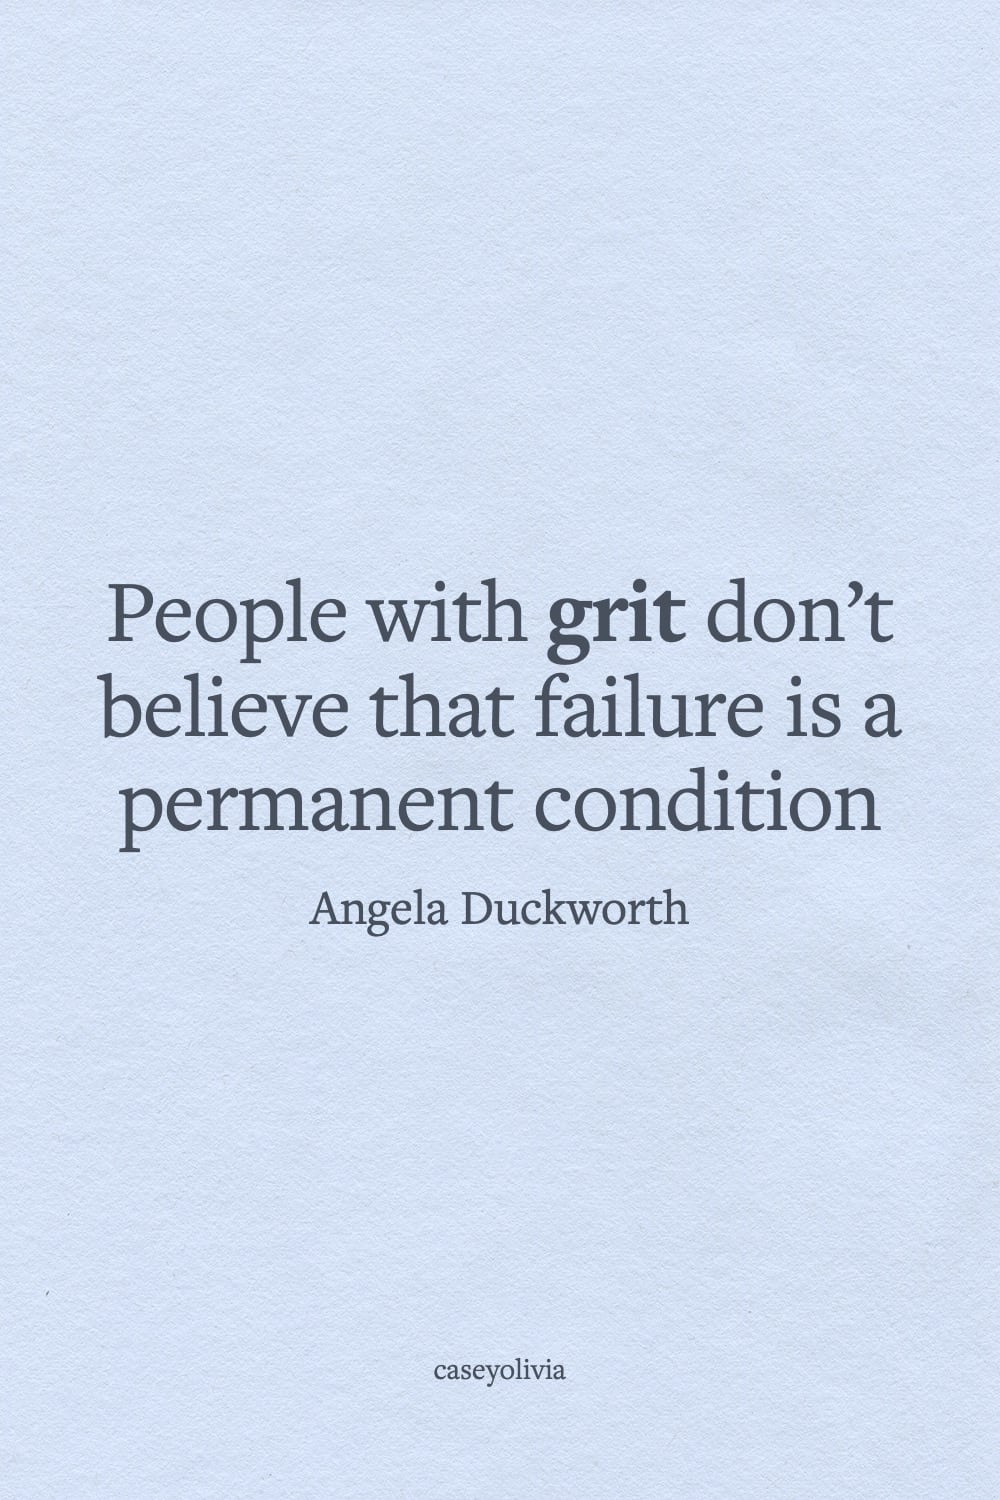 angela duckworth dont believe failure is a permanent condition